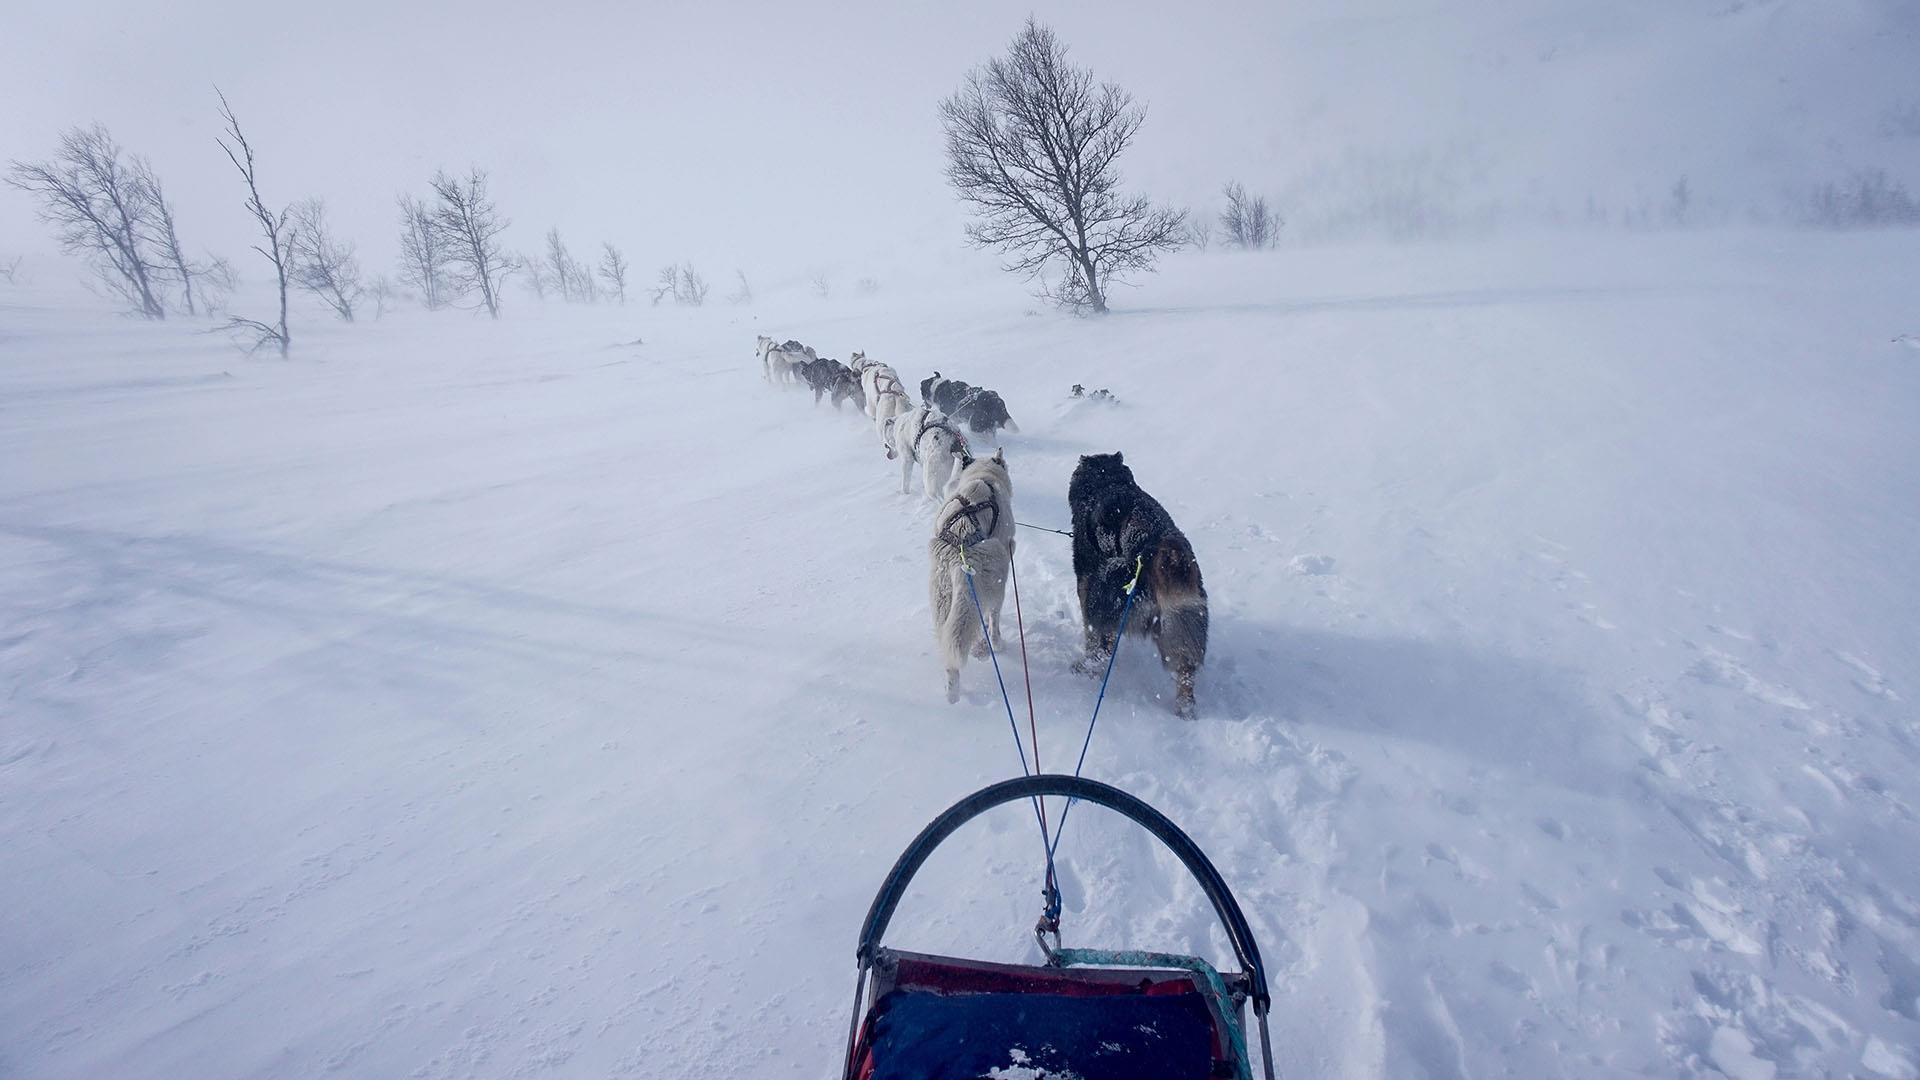 A dog-sledding team from the driver's view running through open snow-covered country, with the sun breaking through the fog.